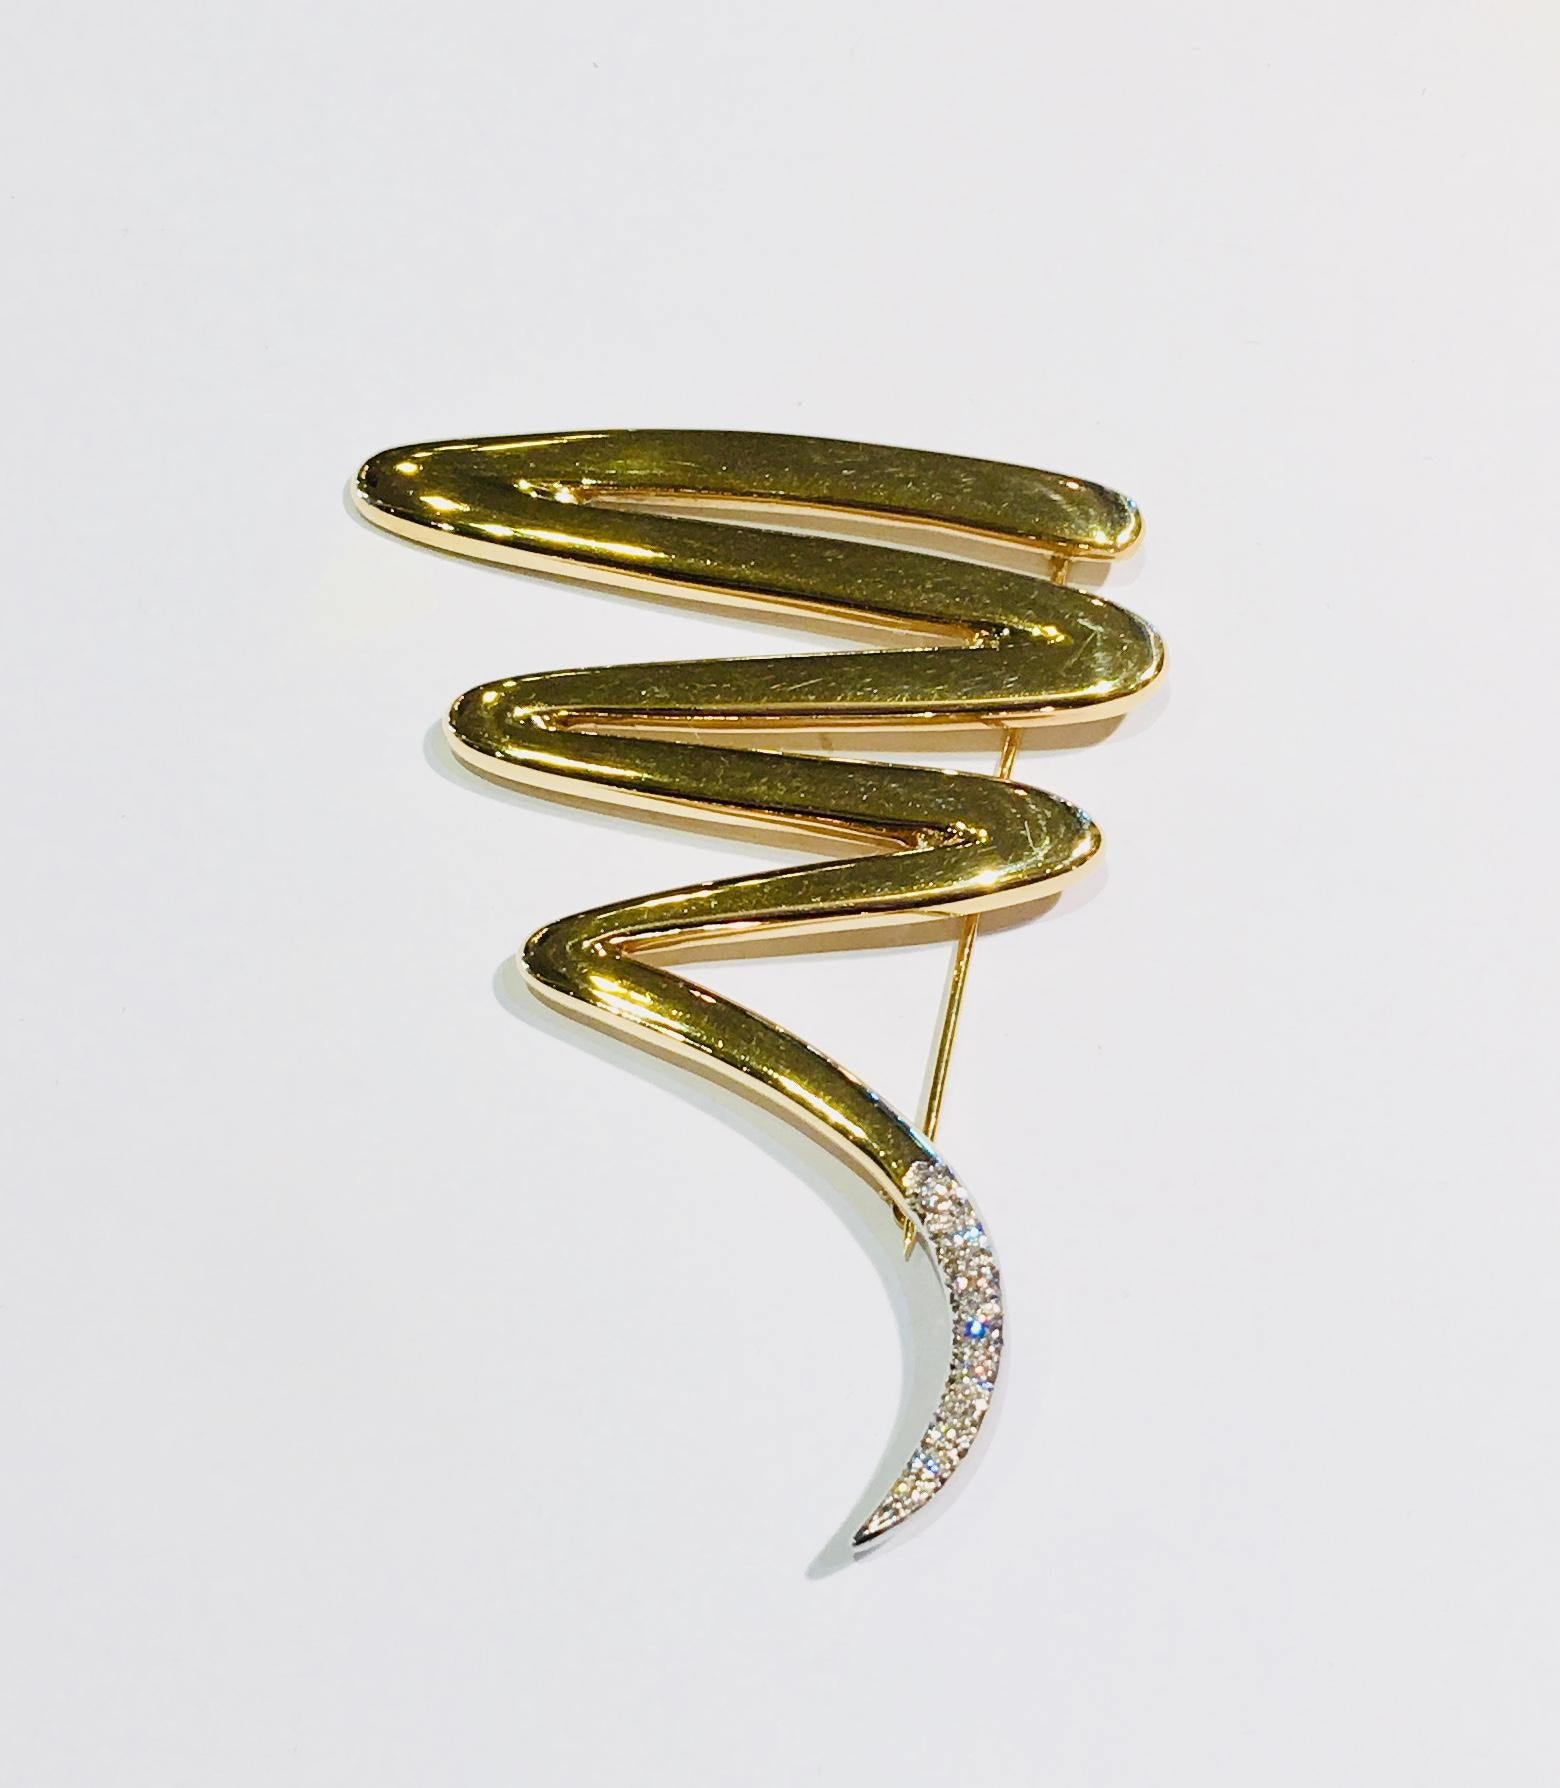 Boldly designed by Paloma Picasso for Tiffany & Co., this estate, two tone 18 karat yellow gold, platinum and diamond brooch pin from 1983 features an abstract zig zag scribble of highly polished 18 karat yellow gold with a platinum and diamond